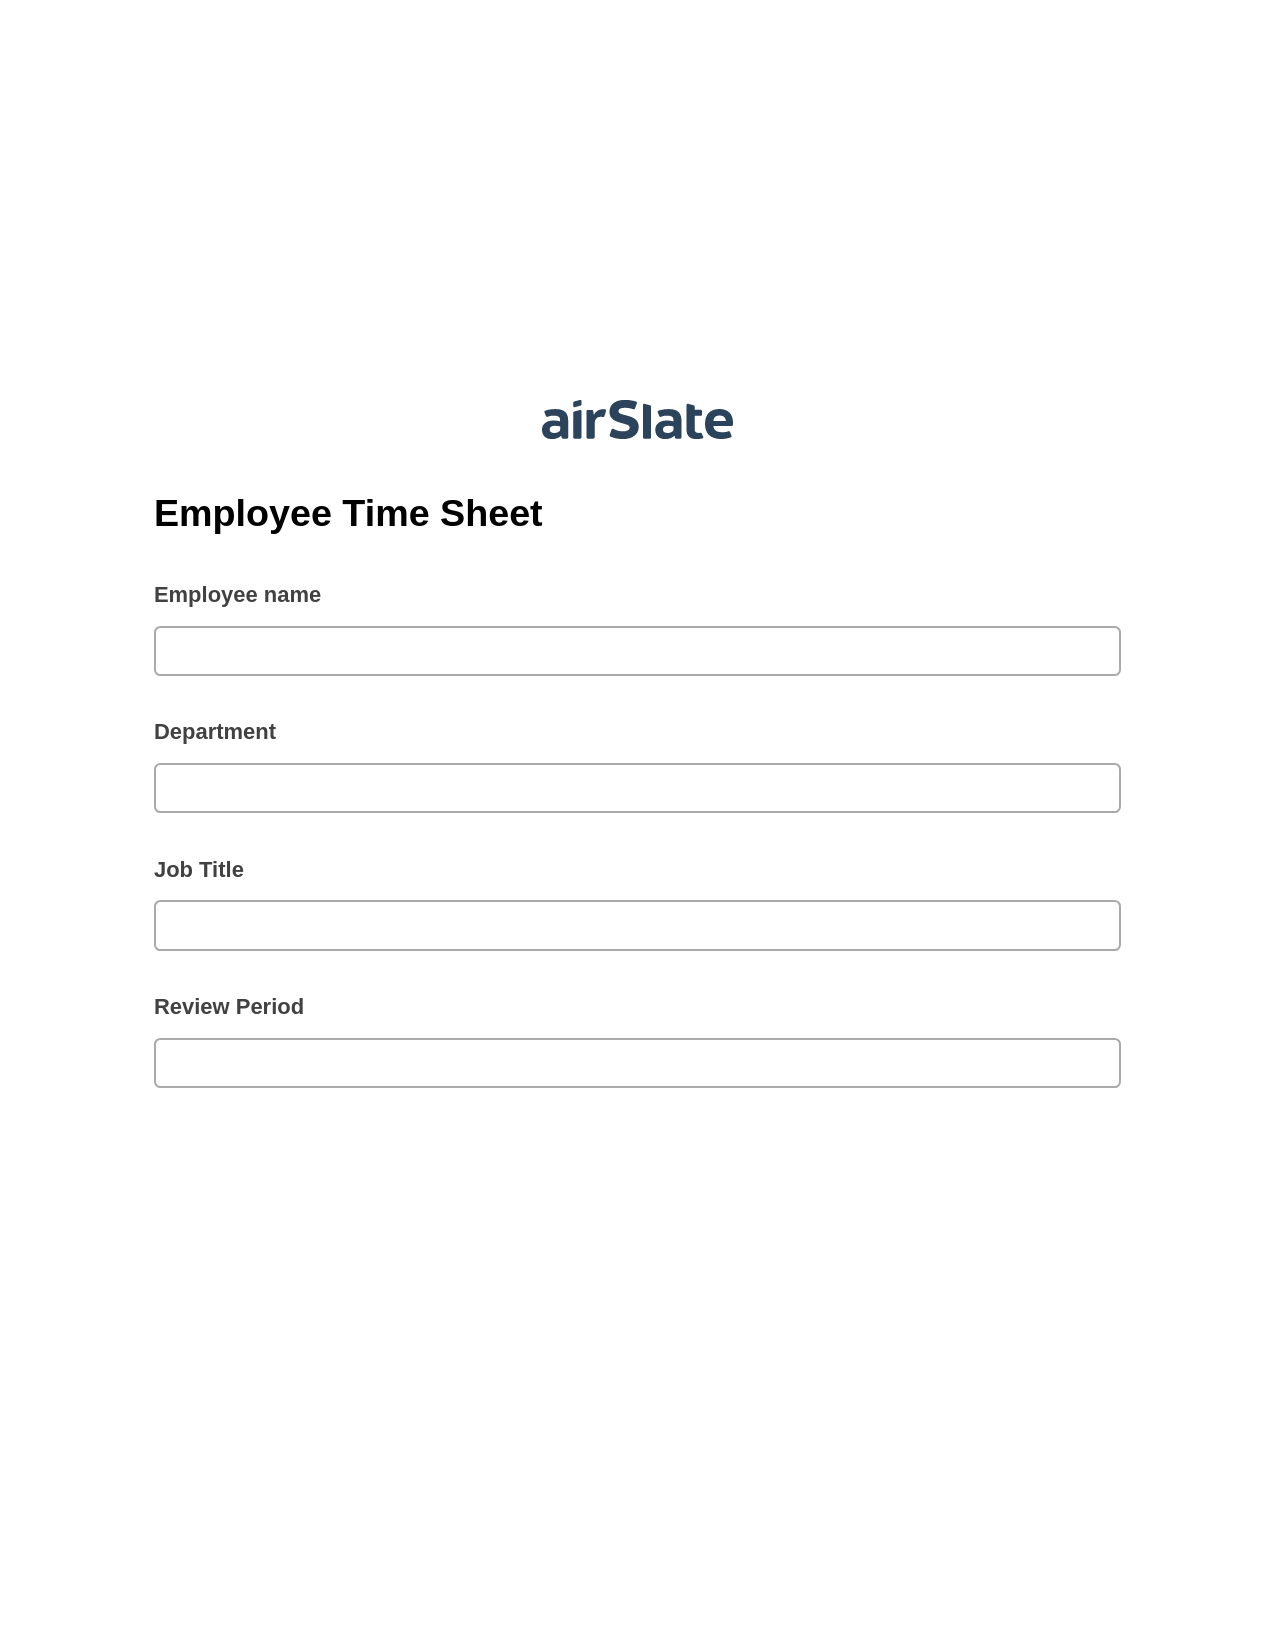 Employee Time Sheet Pre-fill from Excel Spreadsheet Bot, Create slate addon, Archive to OneDrive Bot